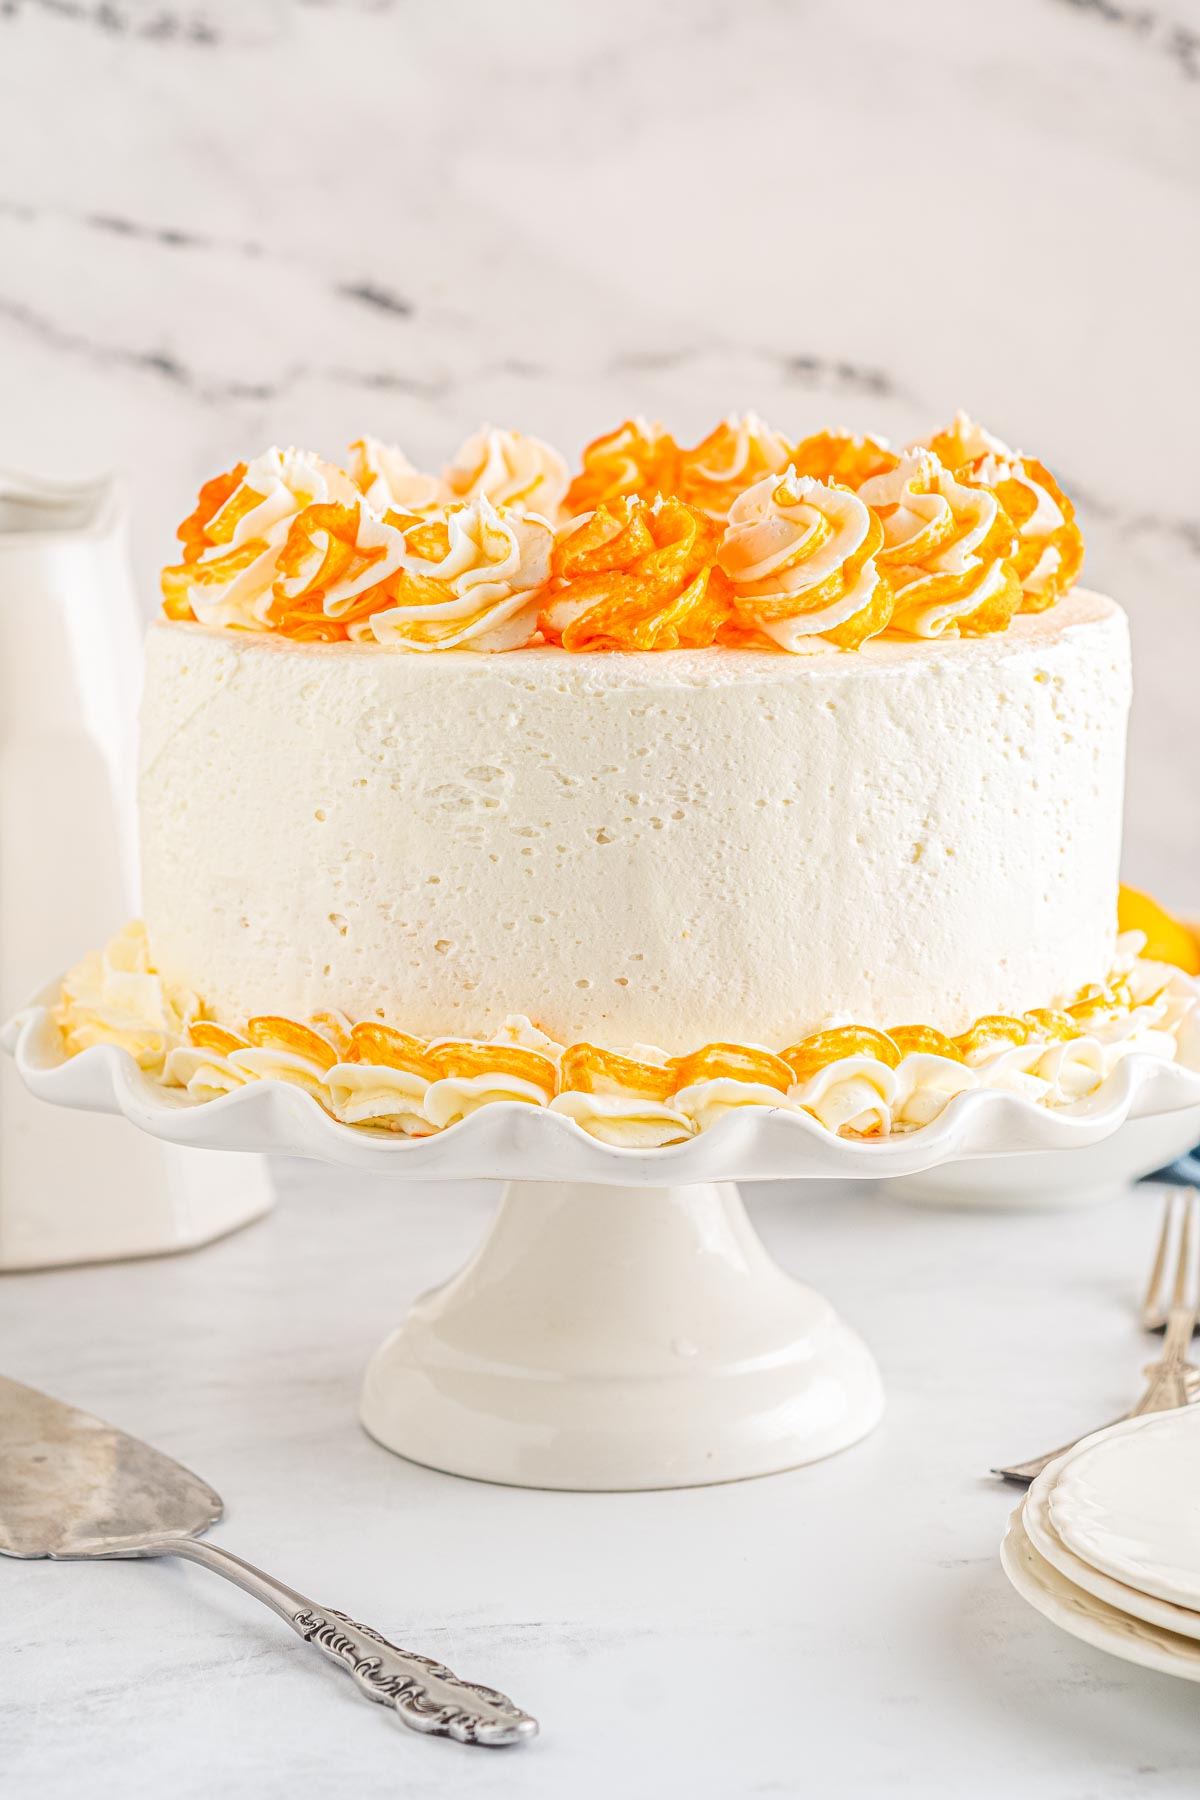 The finished Orange Creamsicle Cake on a white cake stand.